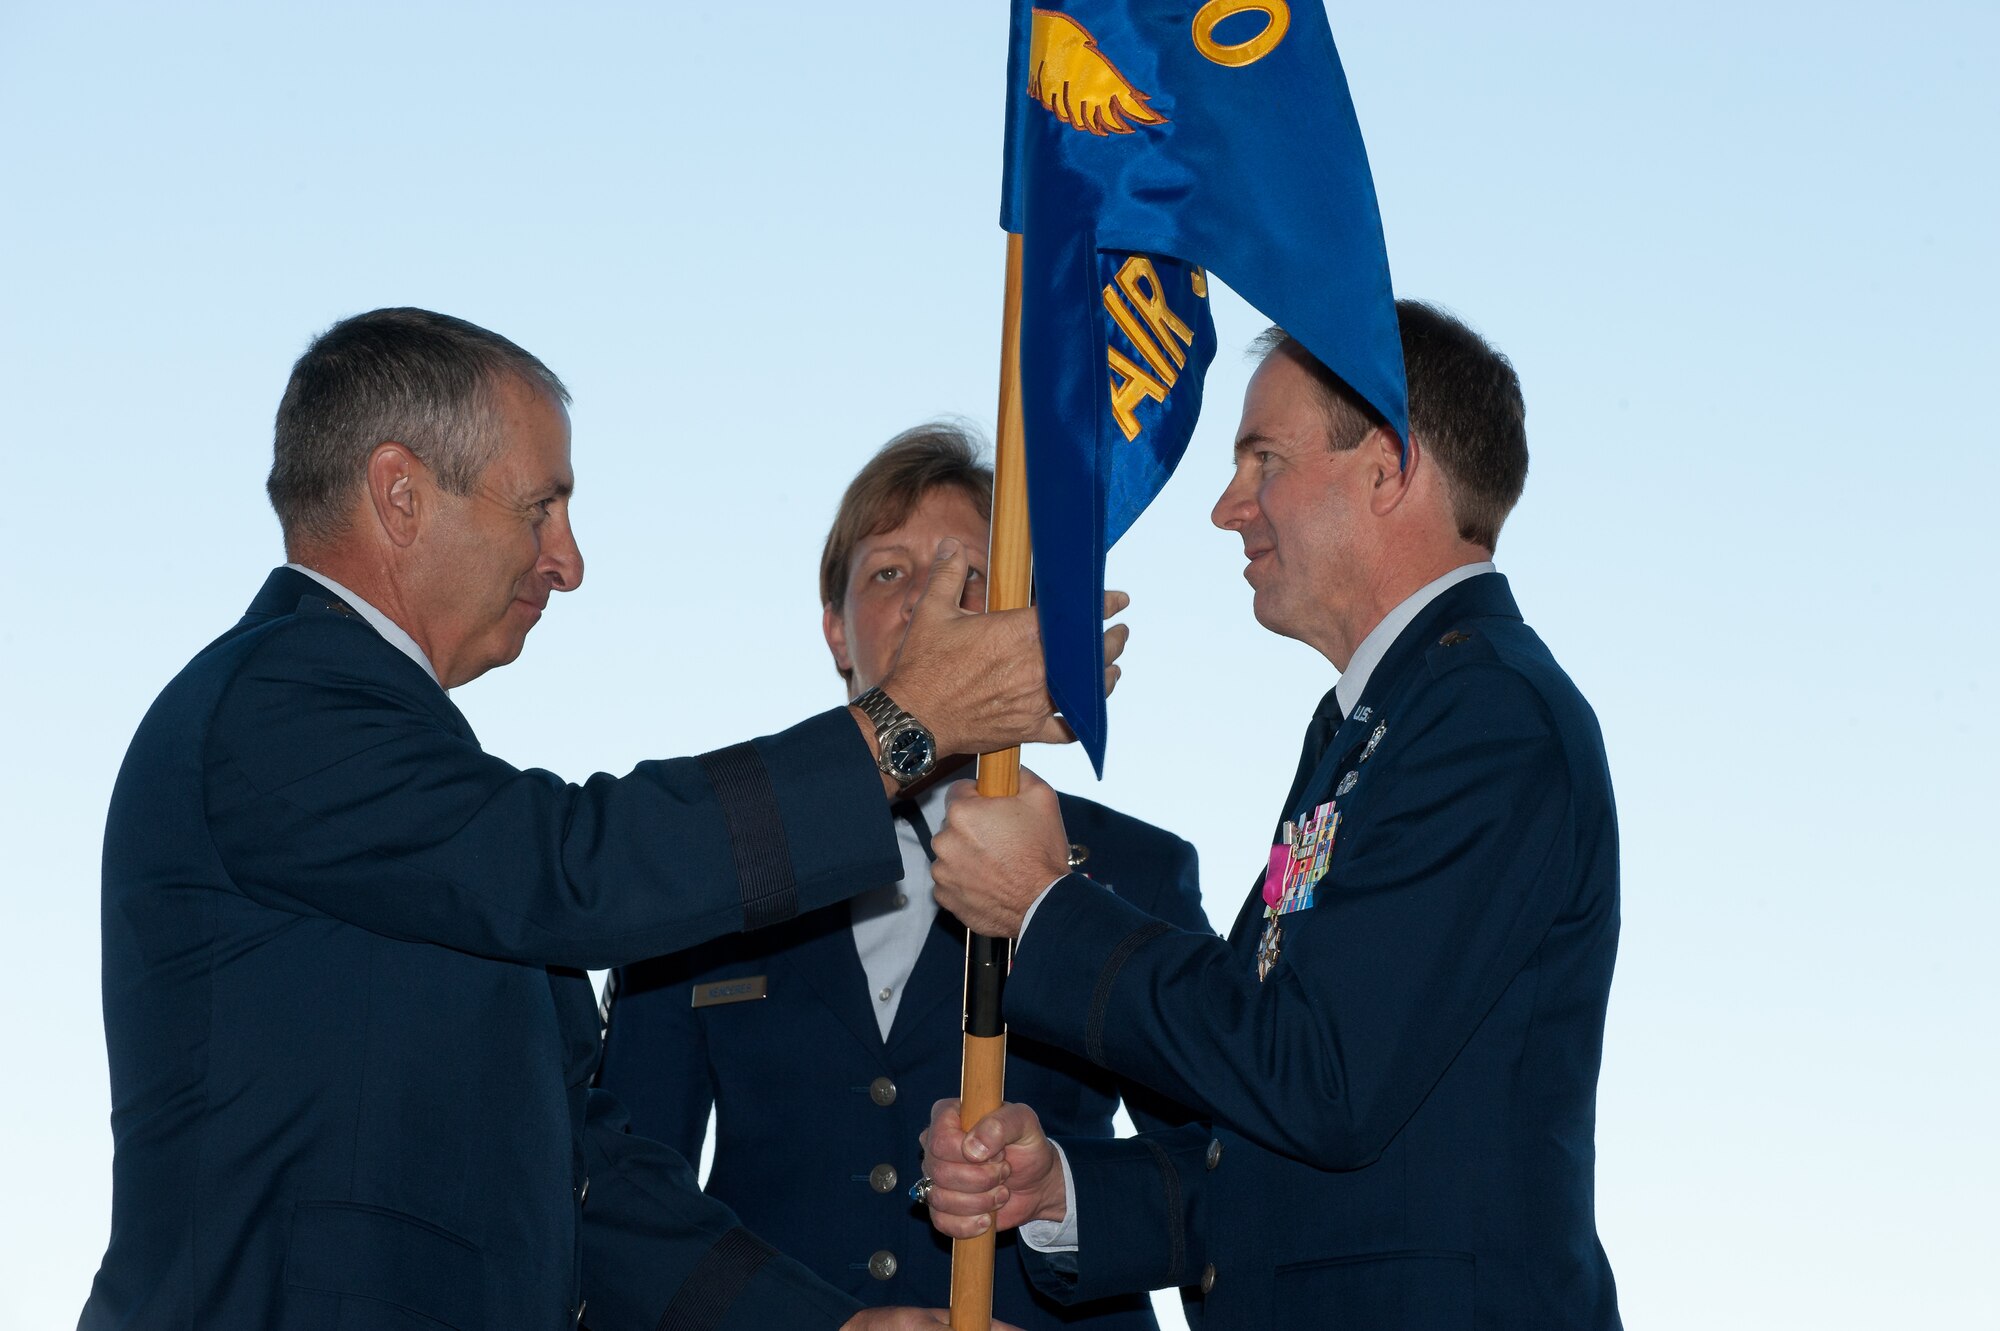 The Adjutant General of Colorado Maj. Gen. H. Michael Edwards passes the Joint Force Headquarters Flag to Brig. Gen. Richard L. Martin in a Change of Command ceremony at Buckley Air Force Base, Colo., Sept. 10, 2011. Martin is assuming command of the Colorado Air National Guard and the position of Assistant Adjutant General - Air. He previously held the position of Director of Operations for the Colorado Air National Guard. (U.S. Air Force photo/Master Sgt. John Nimmo, Sr.) (RELEASED)